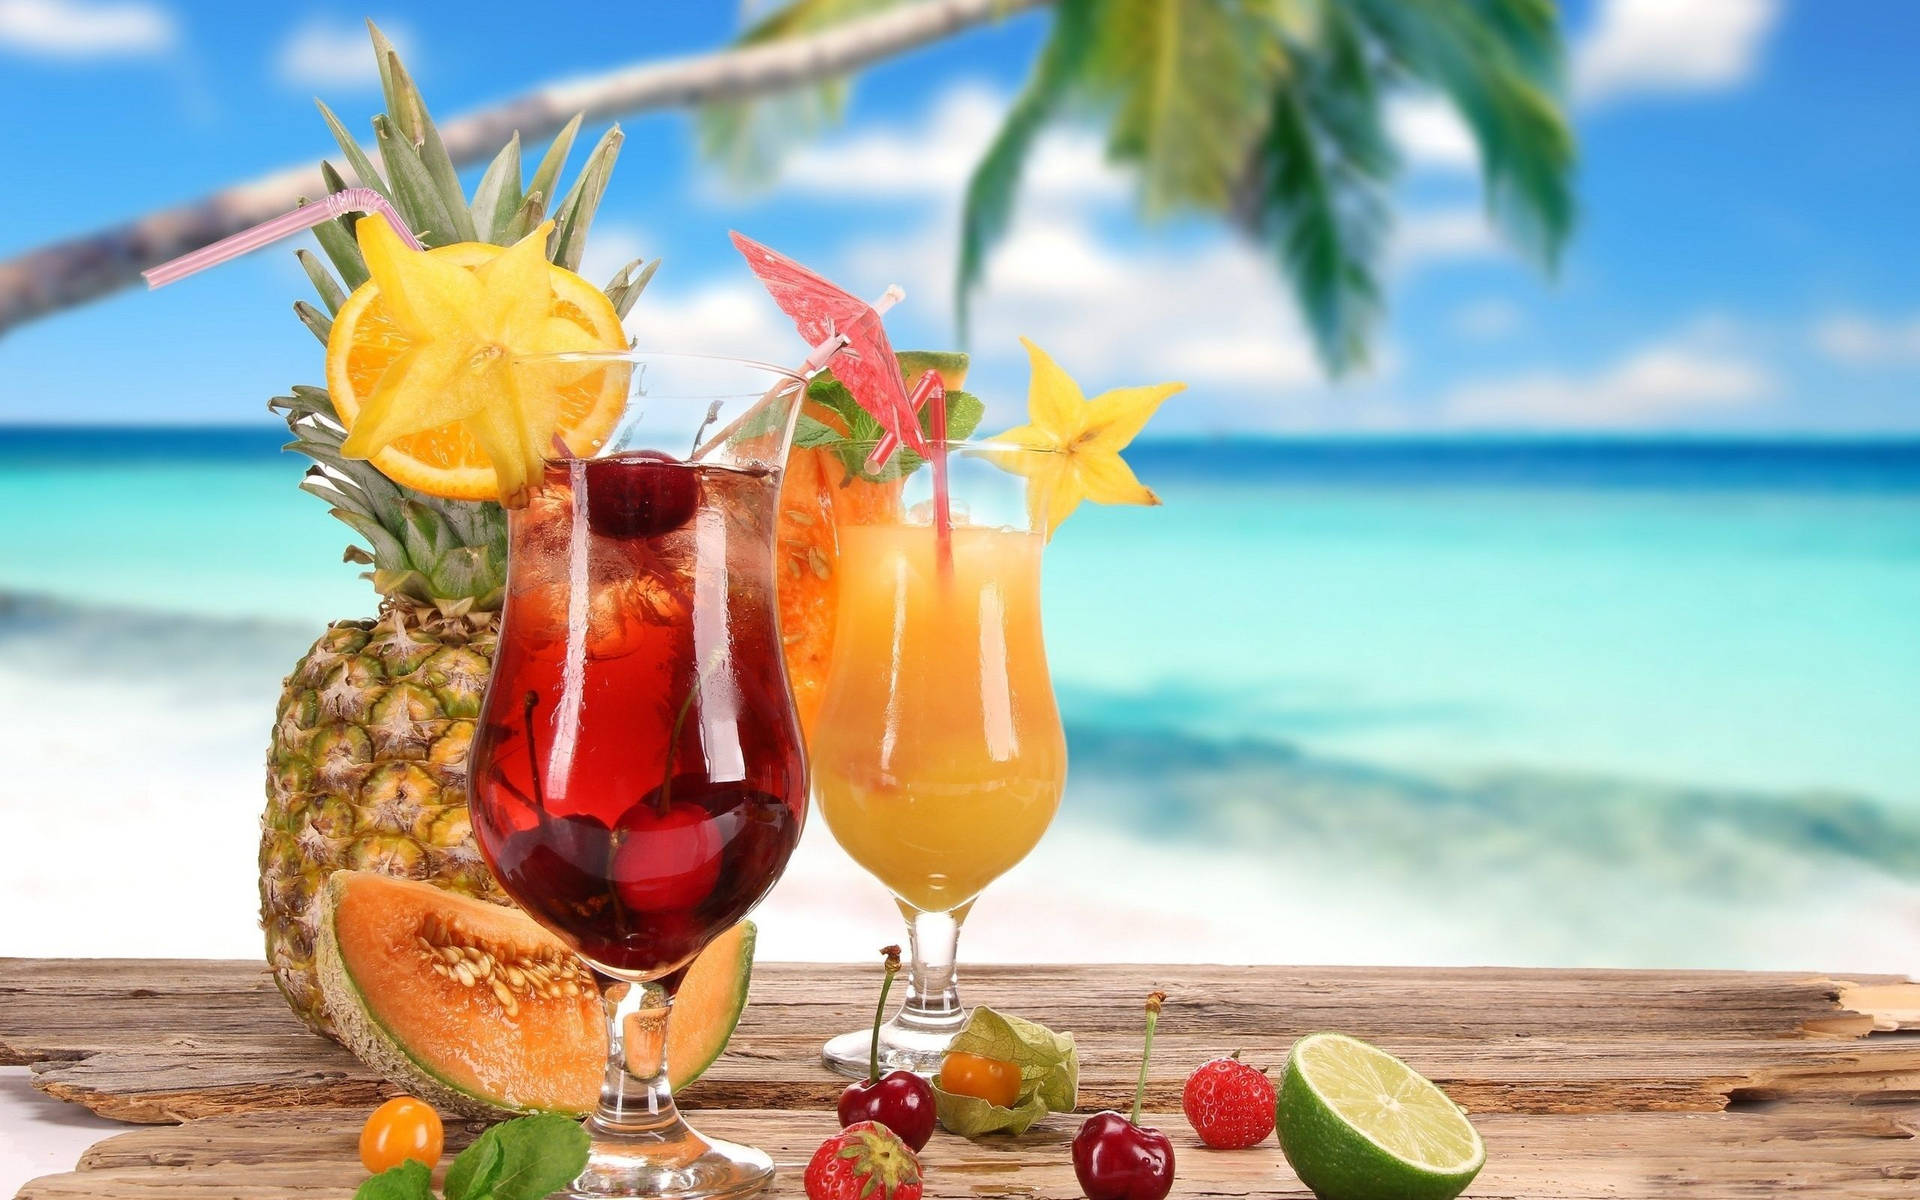 Tropical Drinks At The Beach